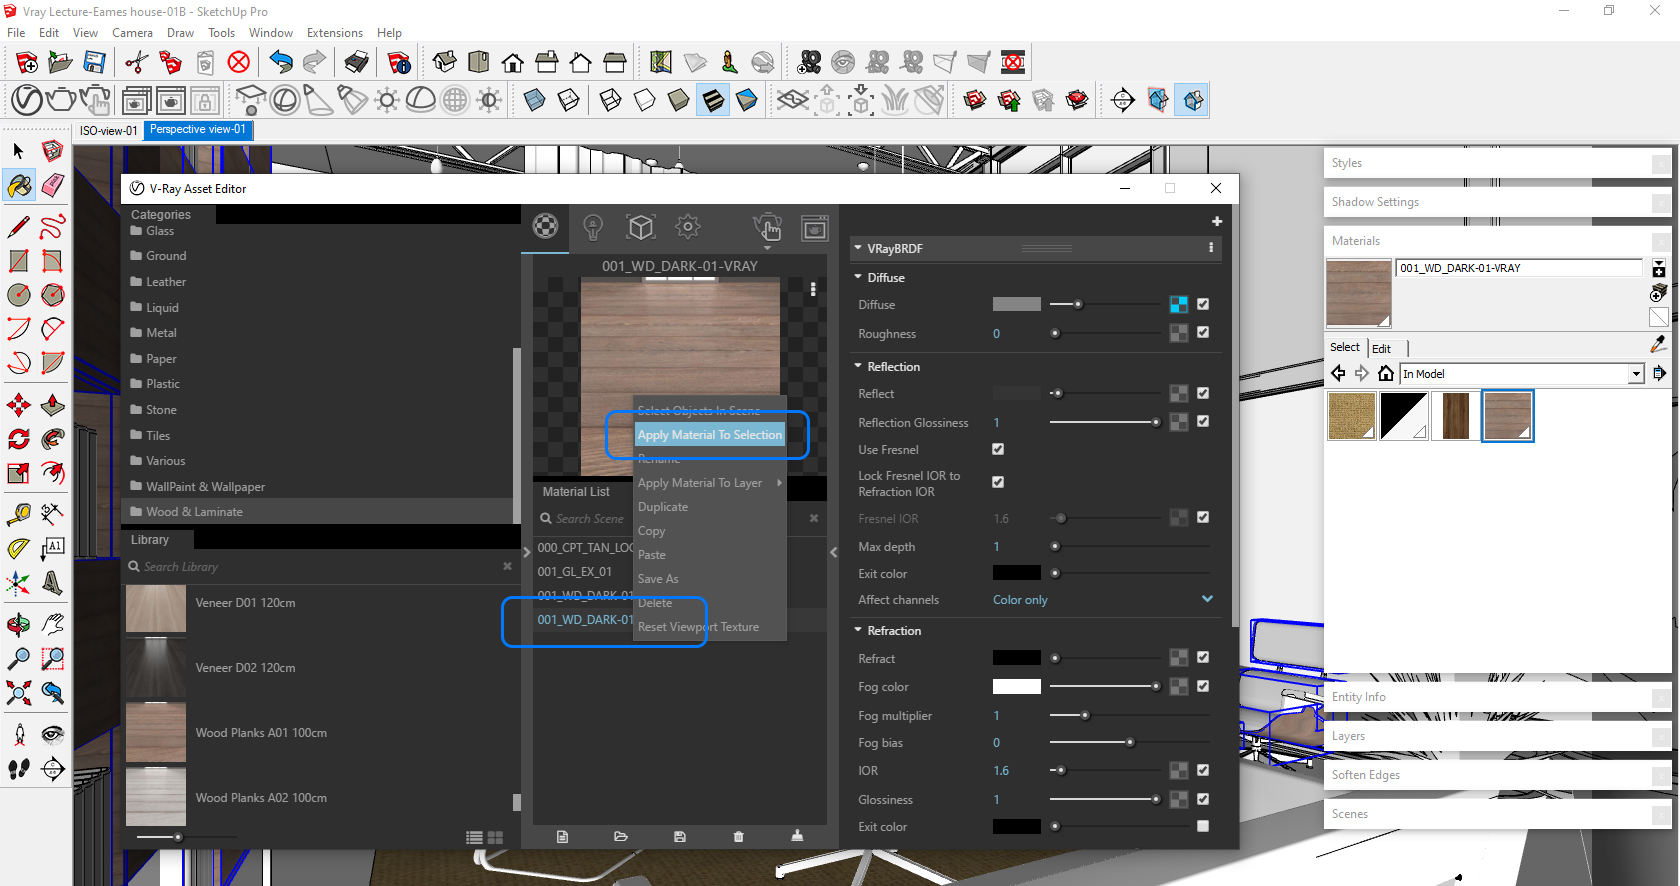 It indicates how to replace the SketchUp material to V-Ray material.